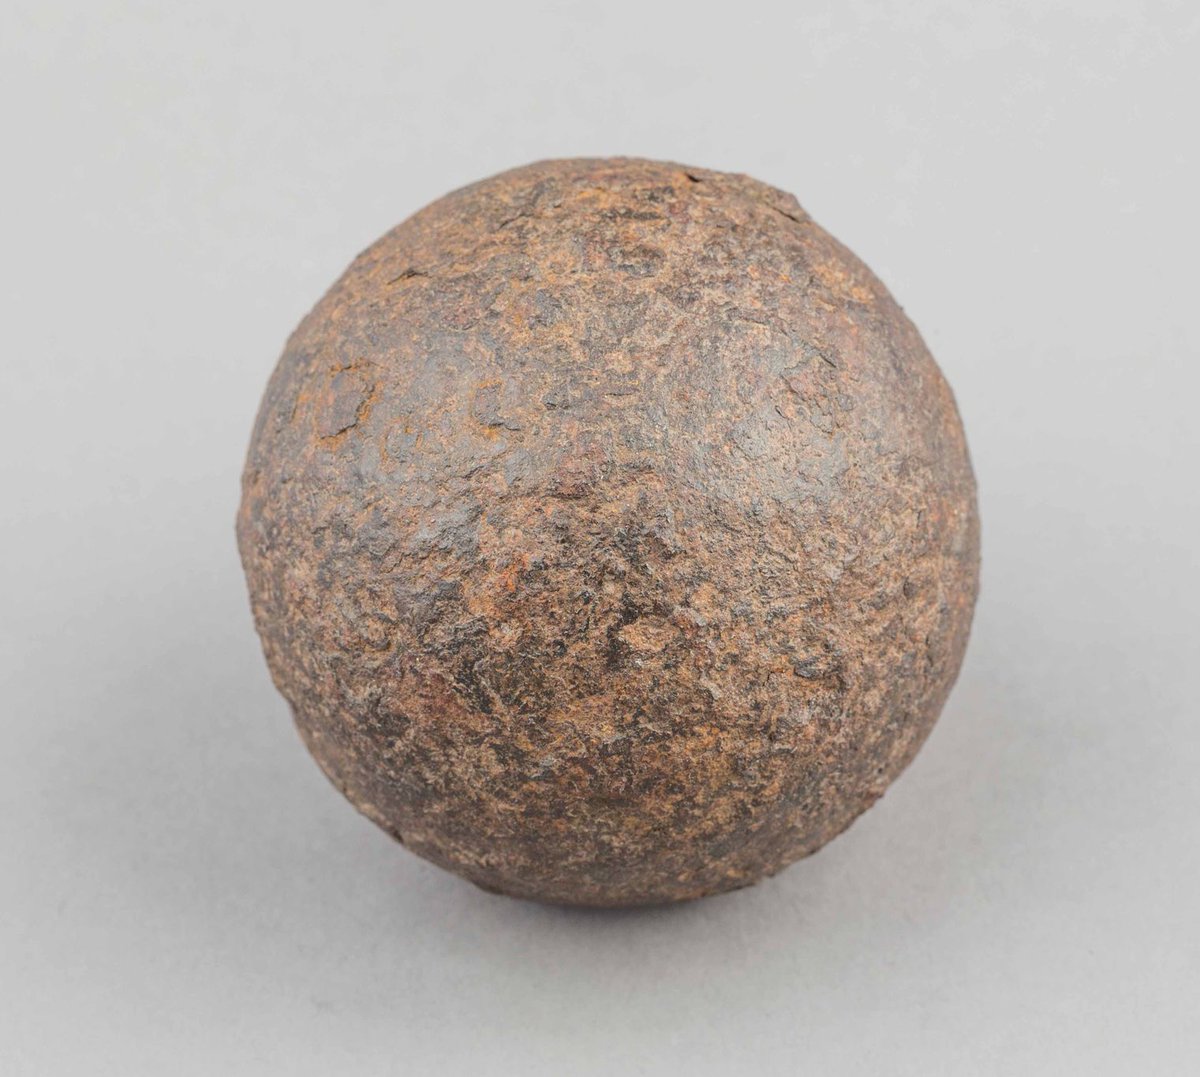 Boom! This #cannonball weighs 3lbs, and was dug up on the #battlefield at @CullodenNTS in November 1964. It had flown 1900 yrds from the position of the #Hanoverian artillery. #cannon #MilitaryHistory #Jacobite #Jacobites #BattleOfCulloden #ScottishArchaeologyMonth #ScotArchMonth